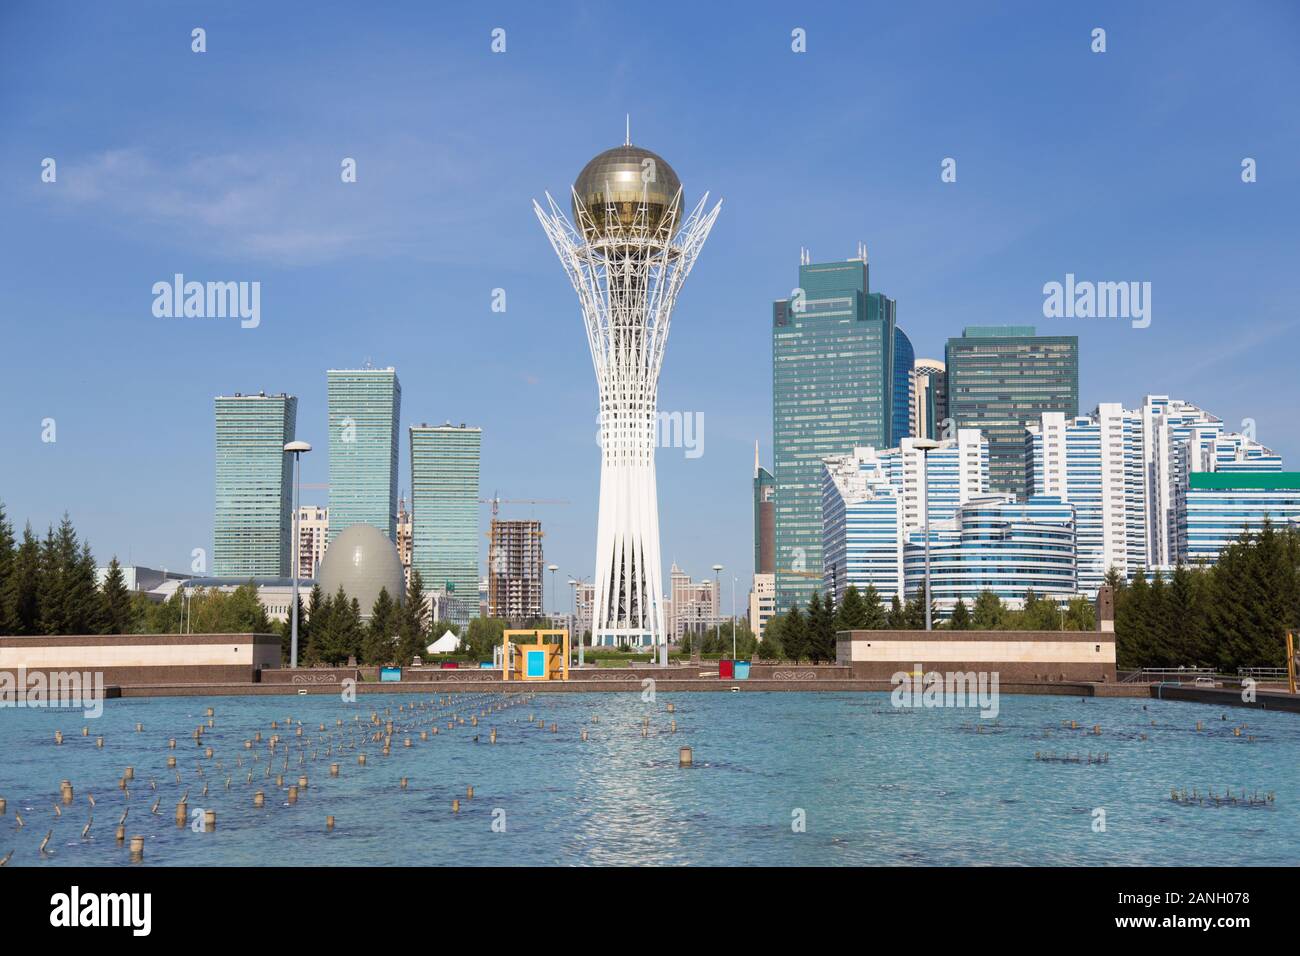 A view of Nur-sultan city in Kazakhstan with Baiterek tower in the center. Stock Photo